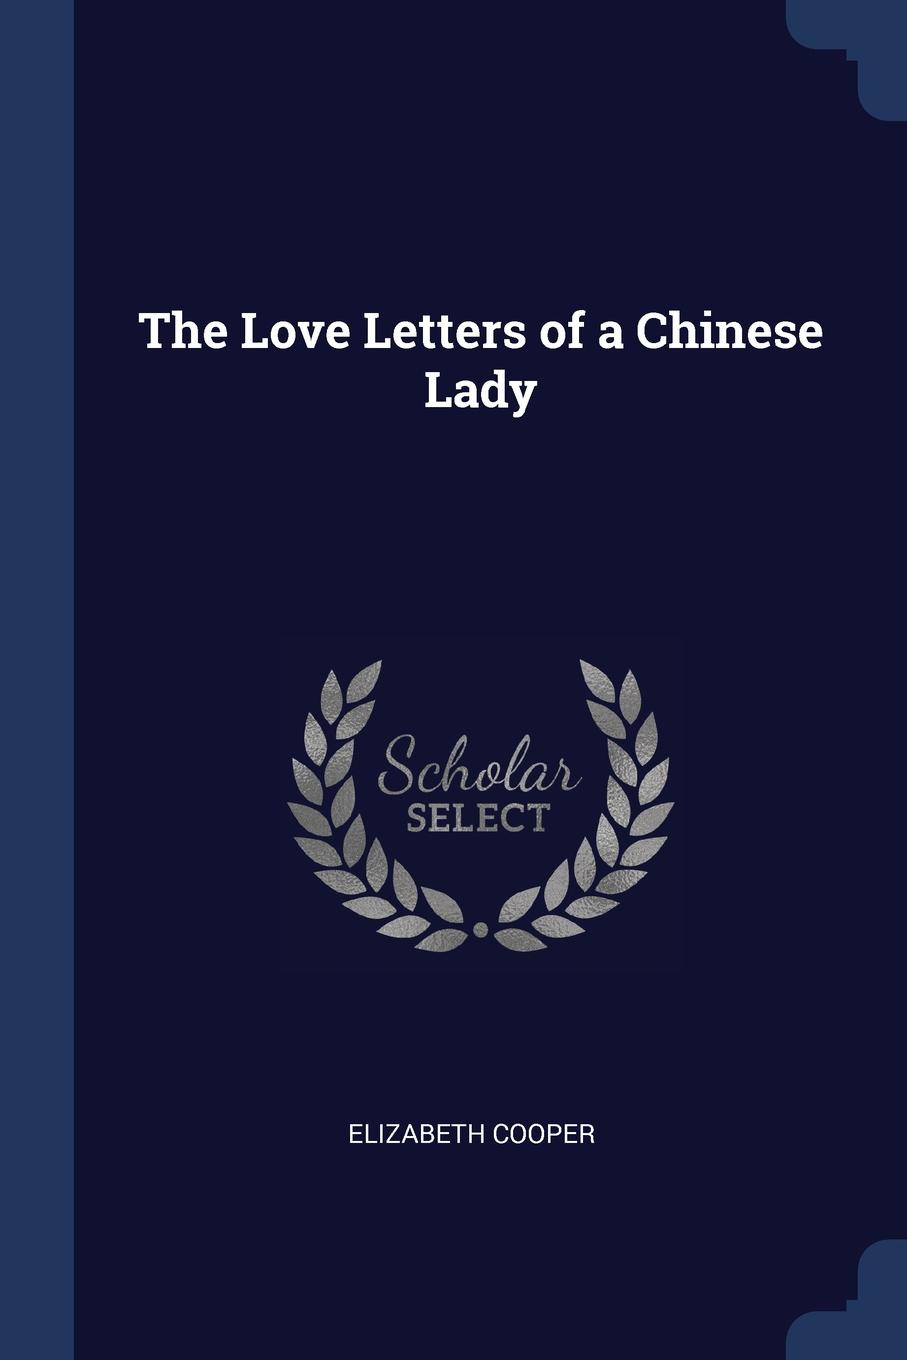 The Love Letters of a Chinese Lady